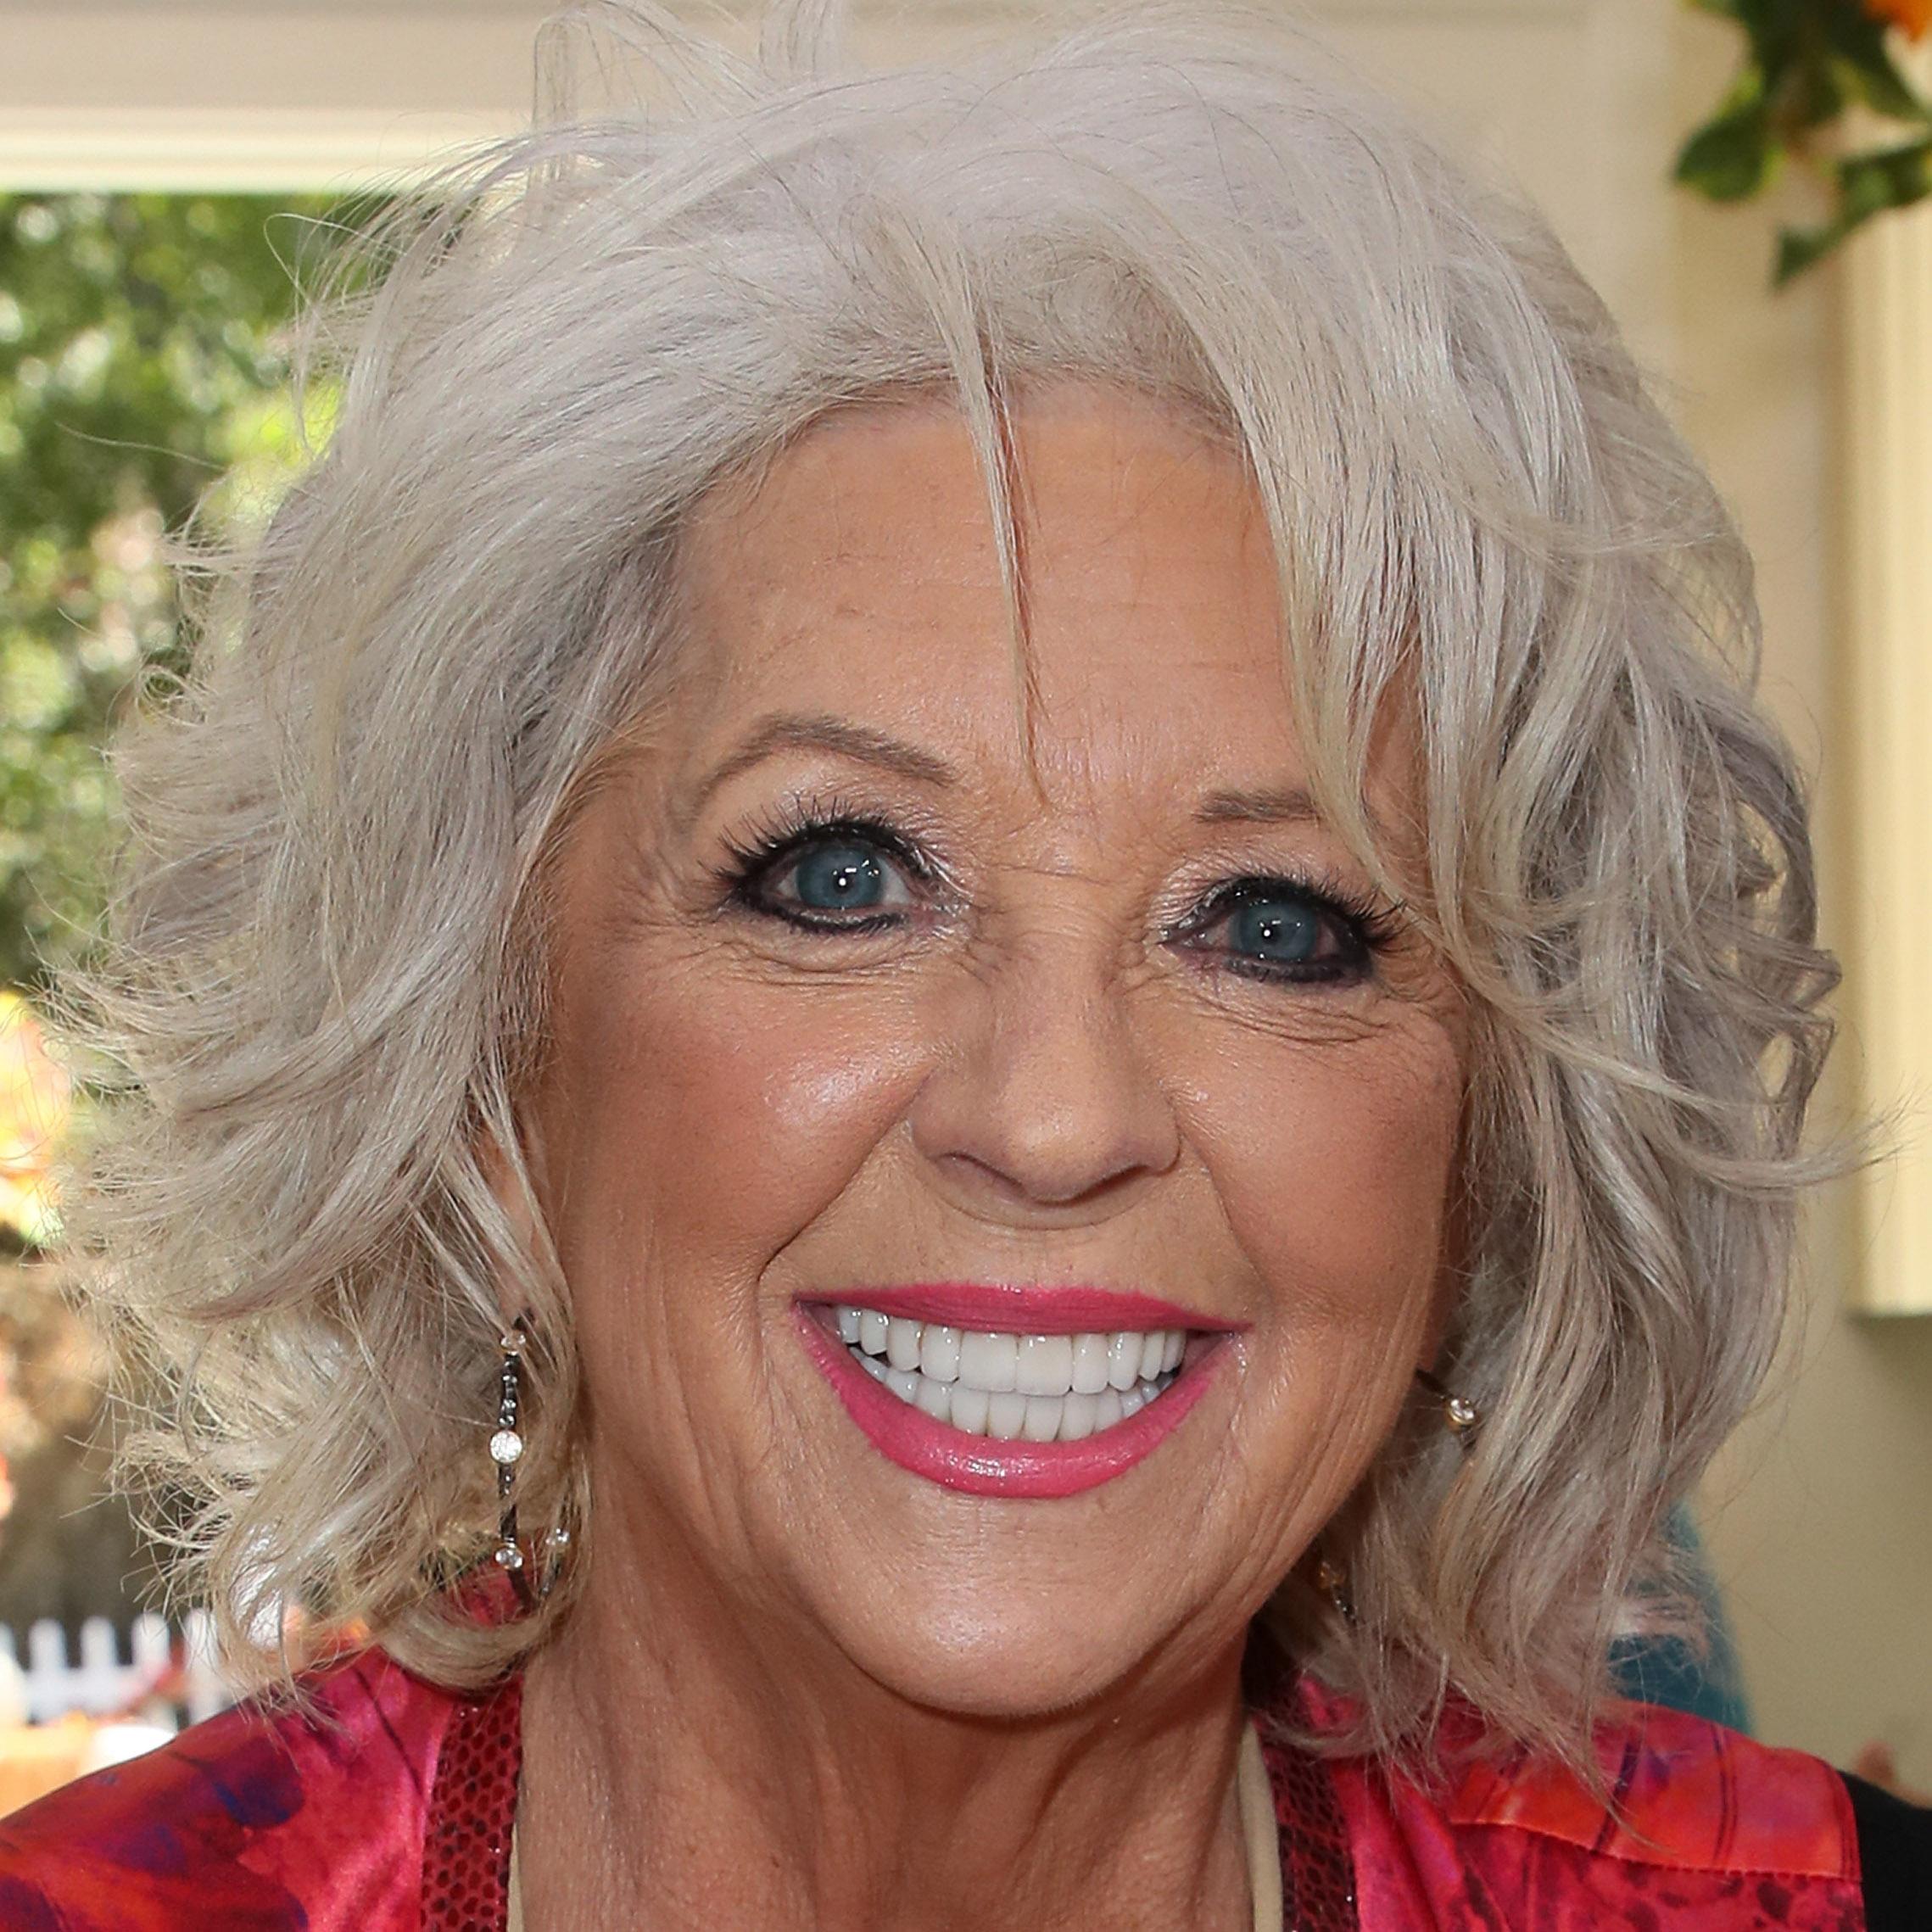 paula deen before and after weight